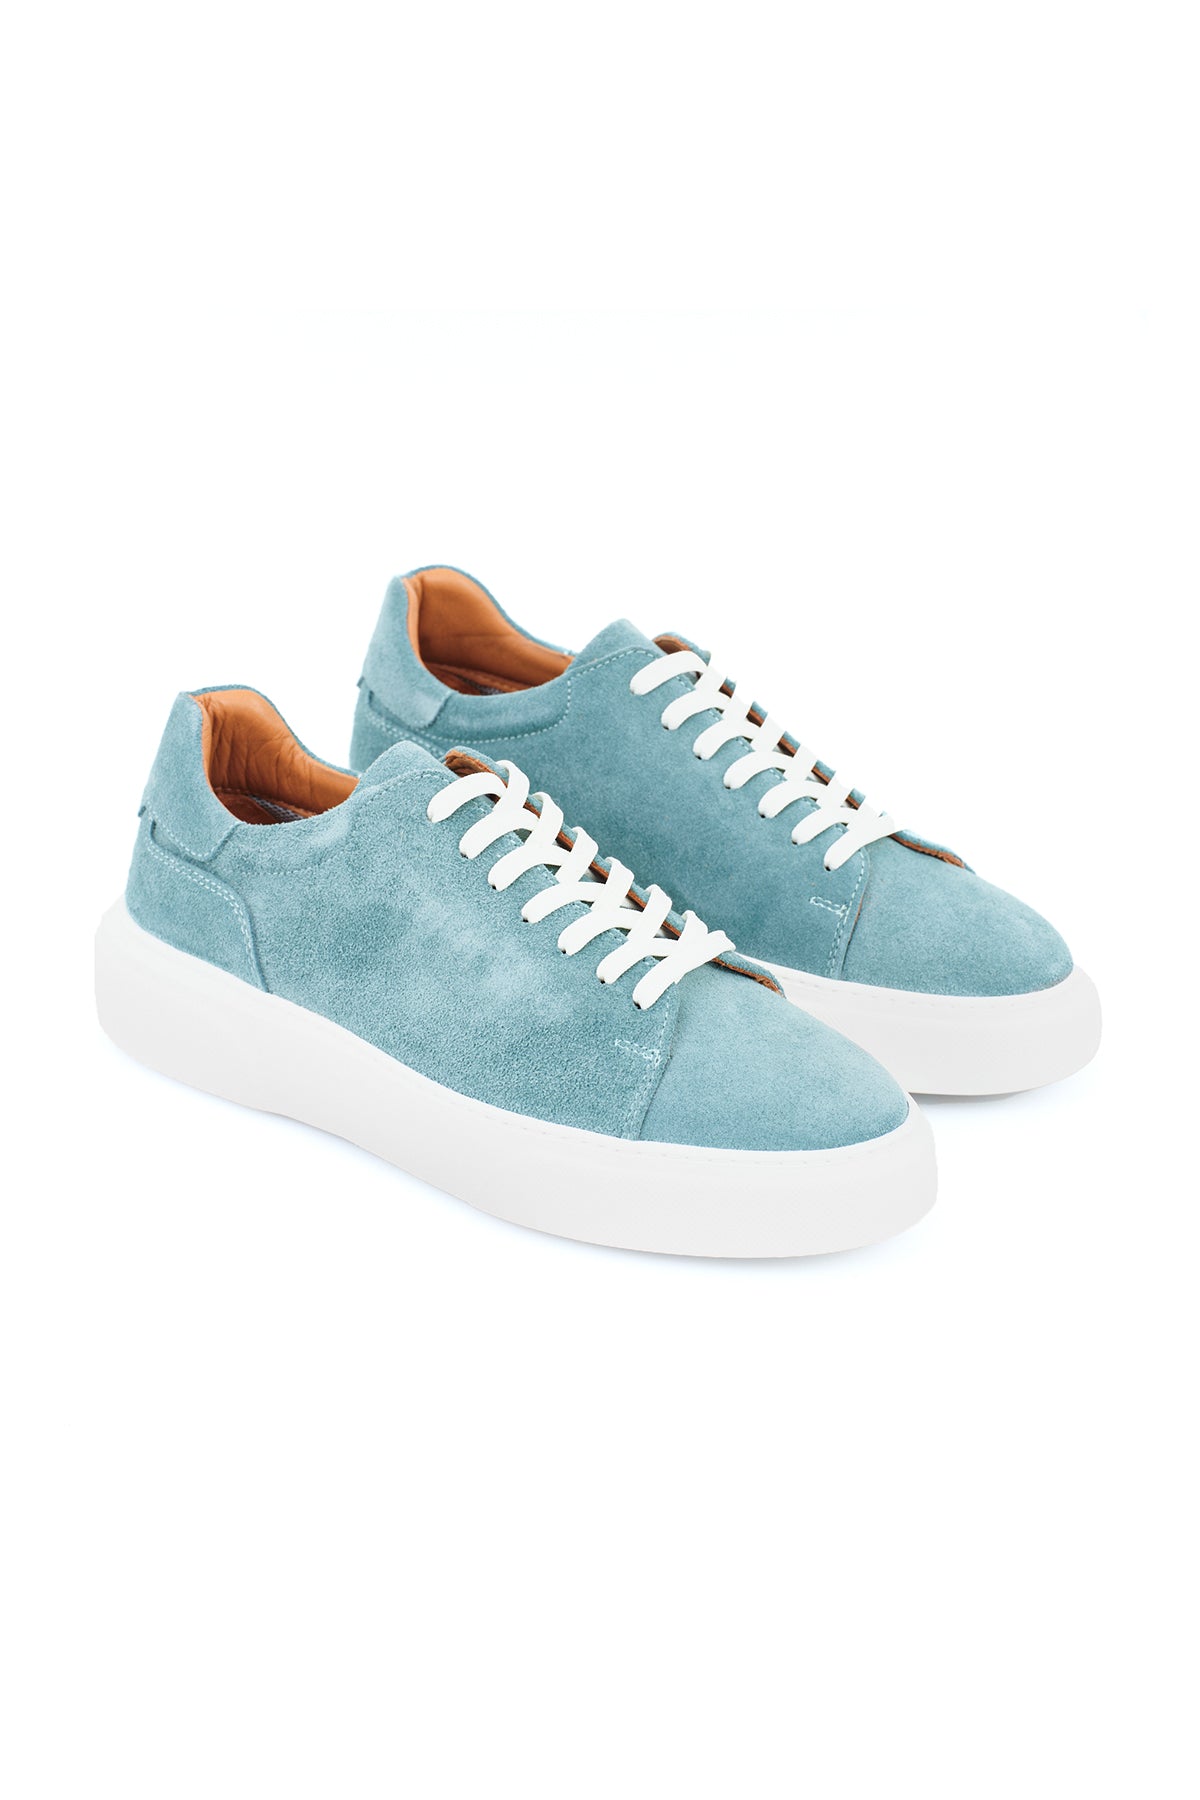 SUEDE SNEAKERS ΟΙΝΟΠΝΕΥΜΑΤΙ.